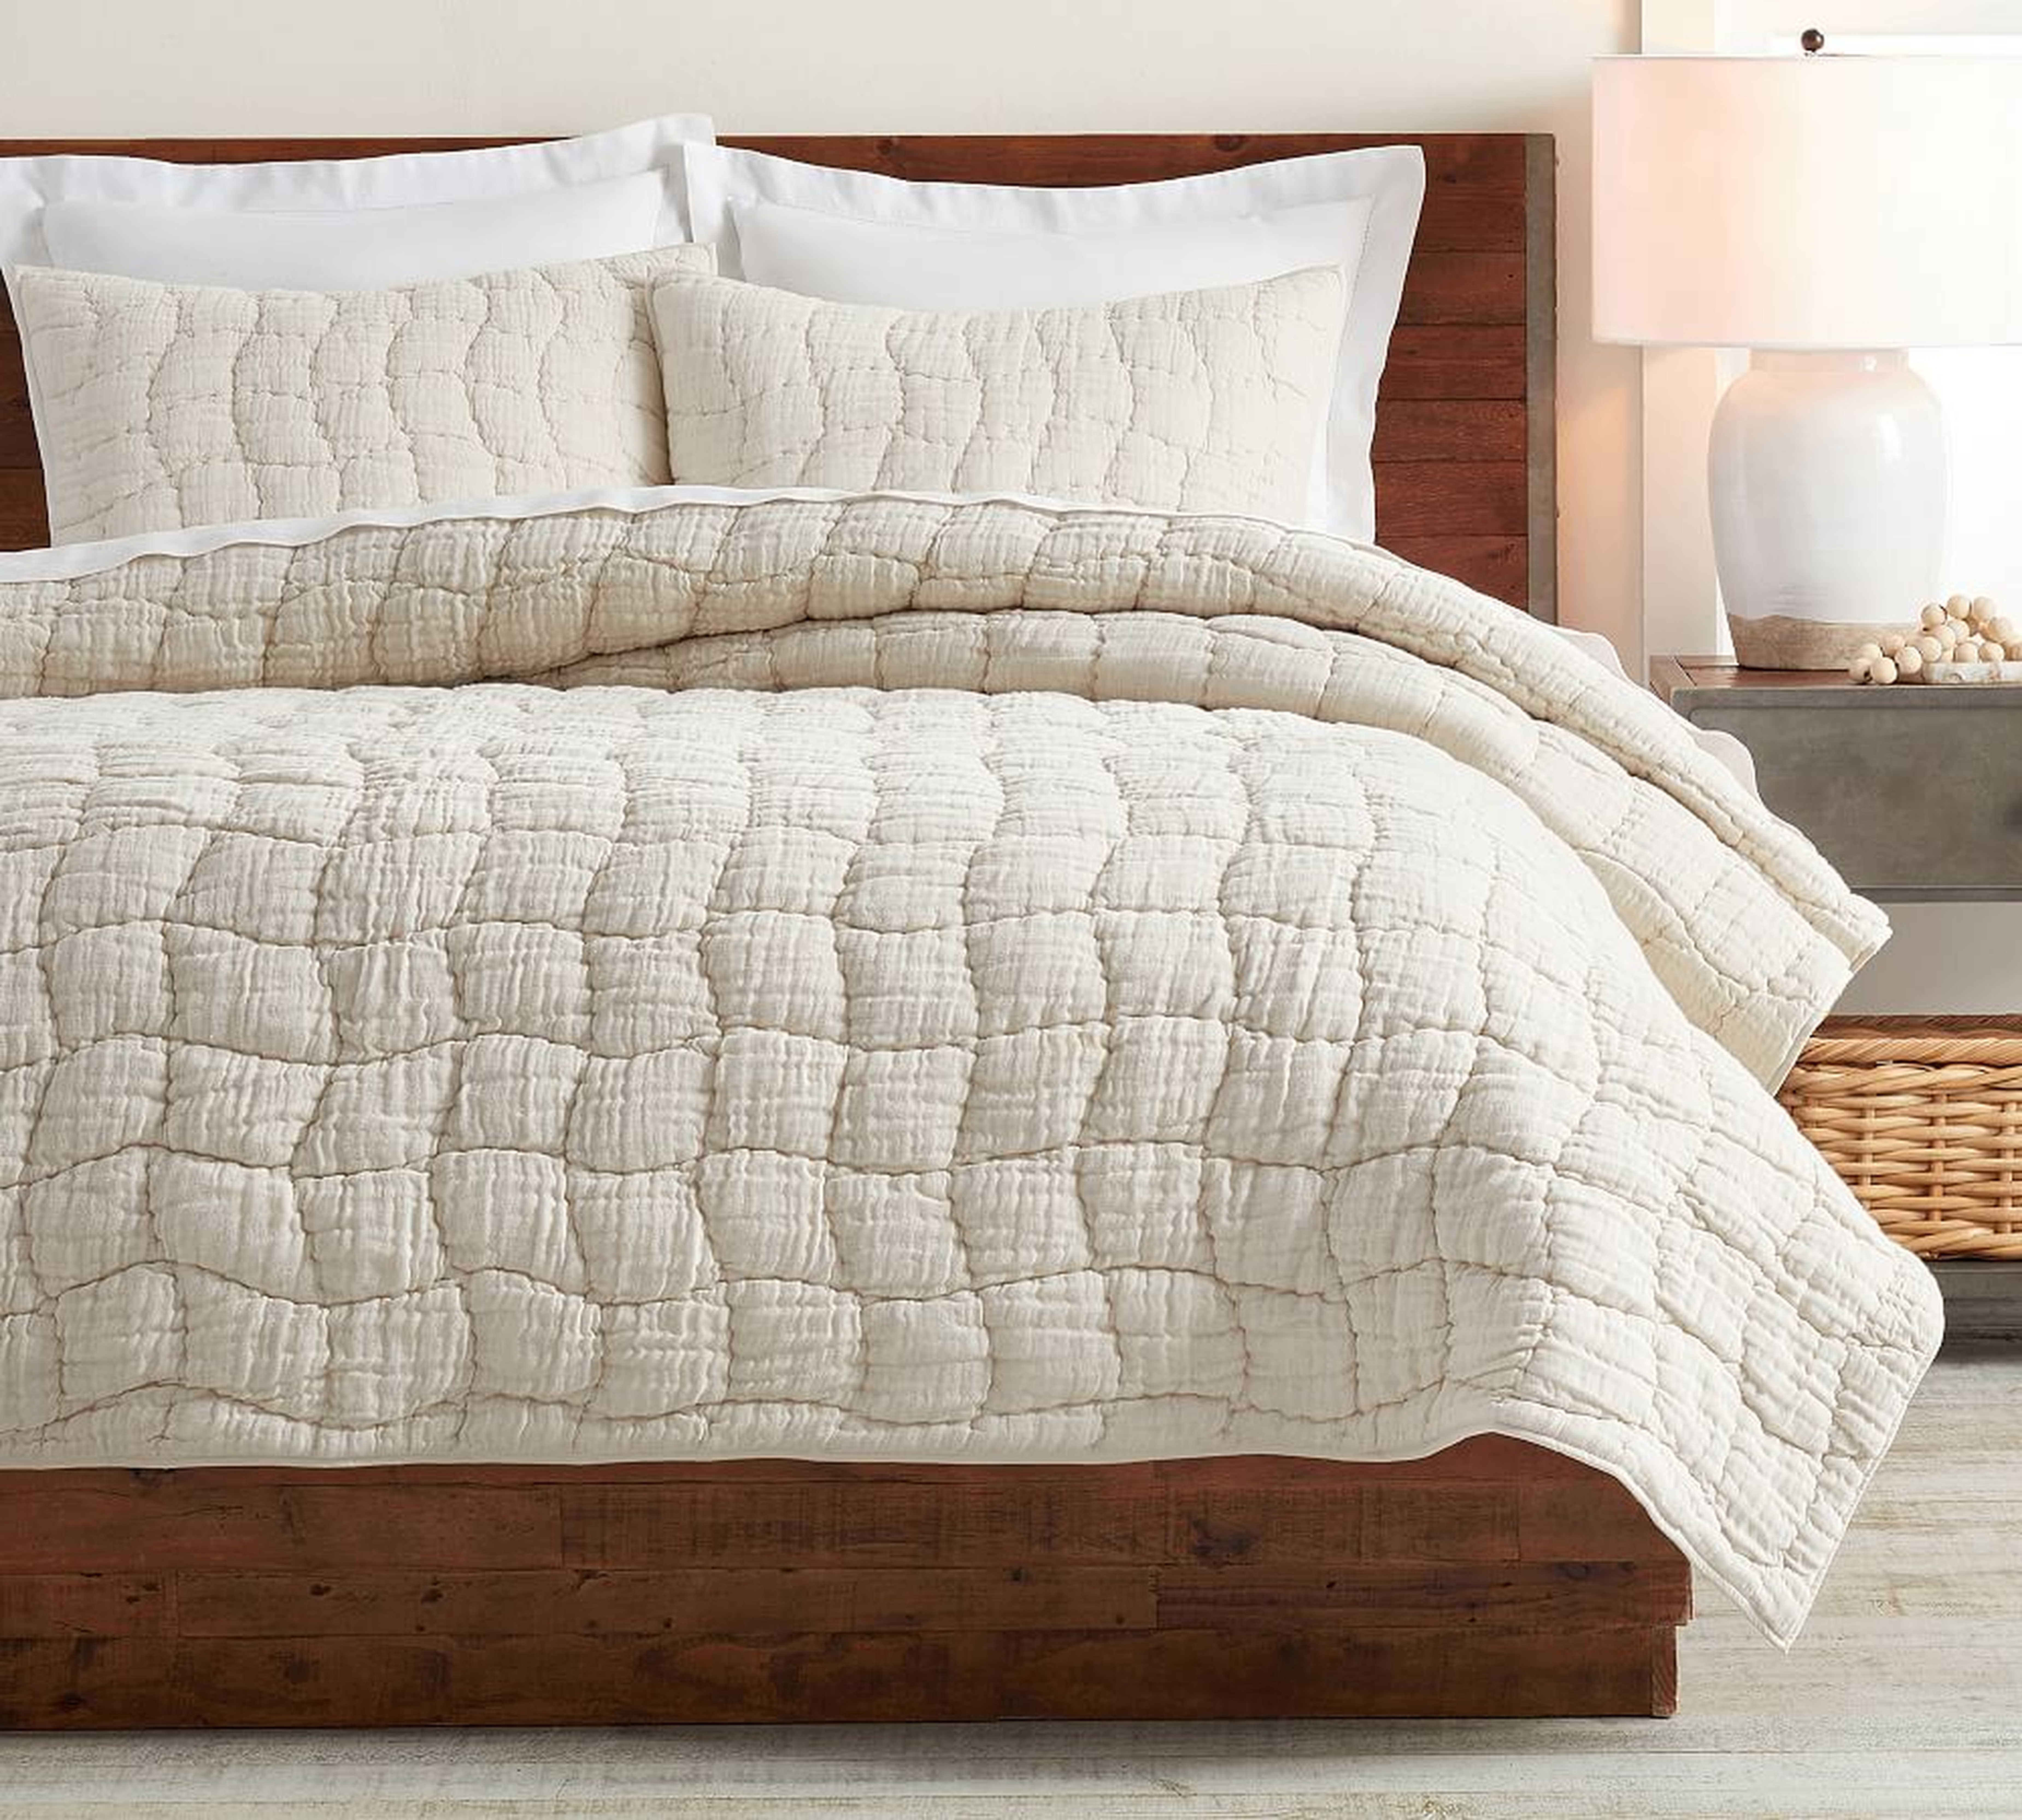 Flax Cloud Hancrafted Linen/Cotton Quilt, King/Cal. King - Pottery Barn